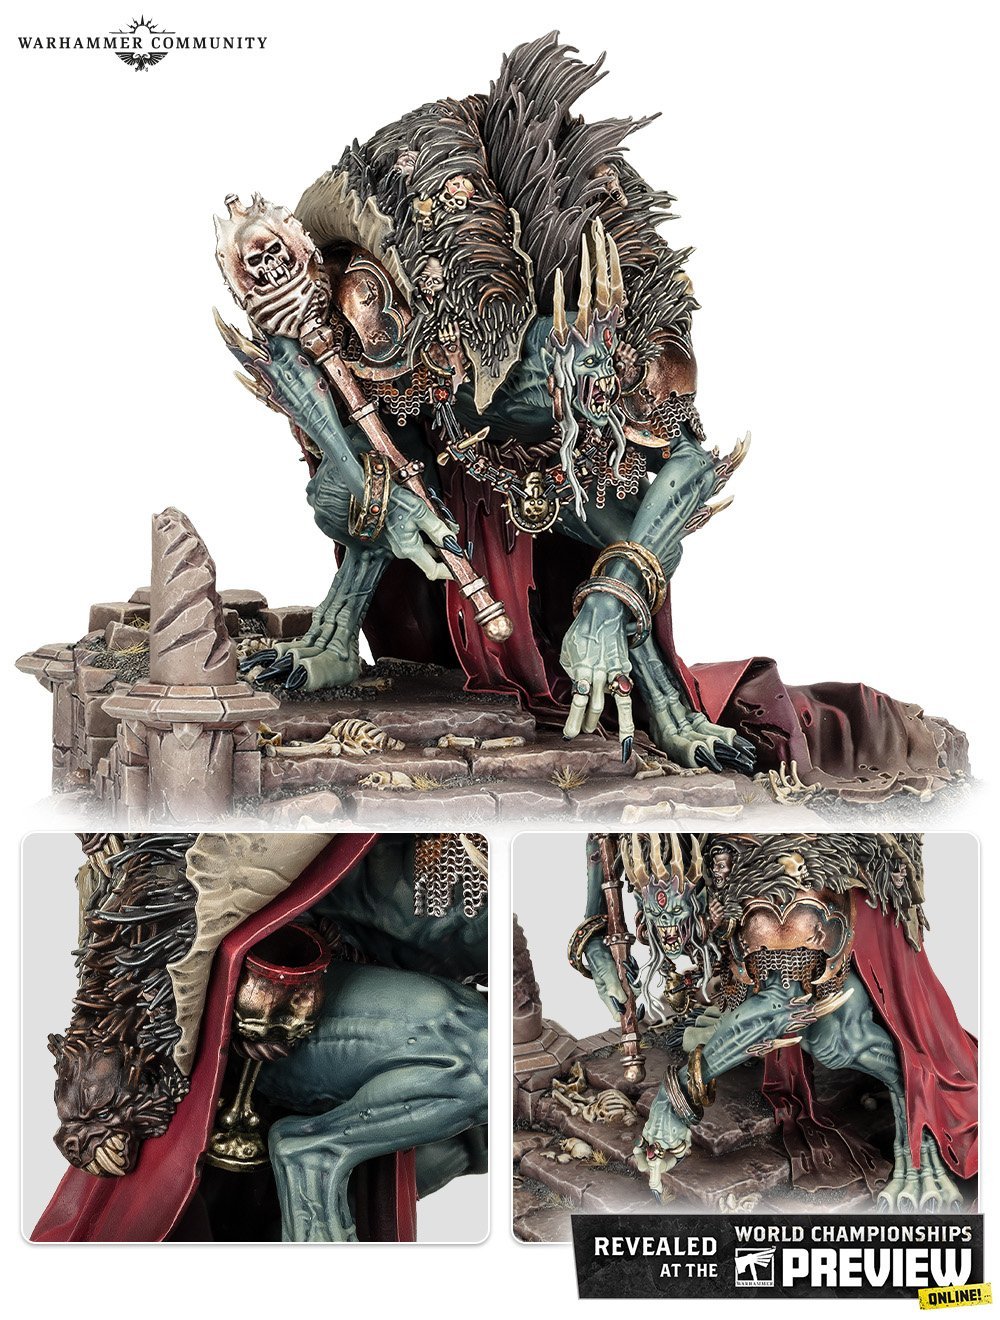 Warhammer preview: Ushoran, Mortarch of Delusion, is a giant ghoul who looks like a Dark Souls boss - details including goblet and shoulders